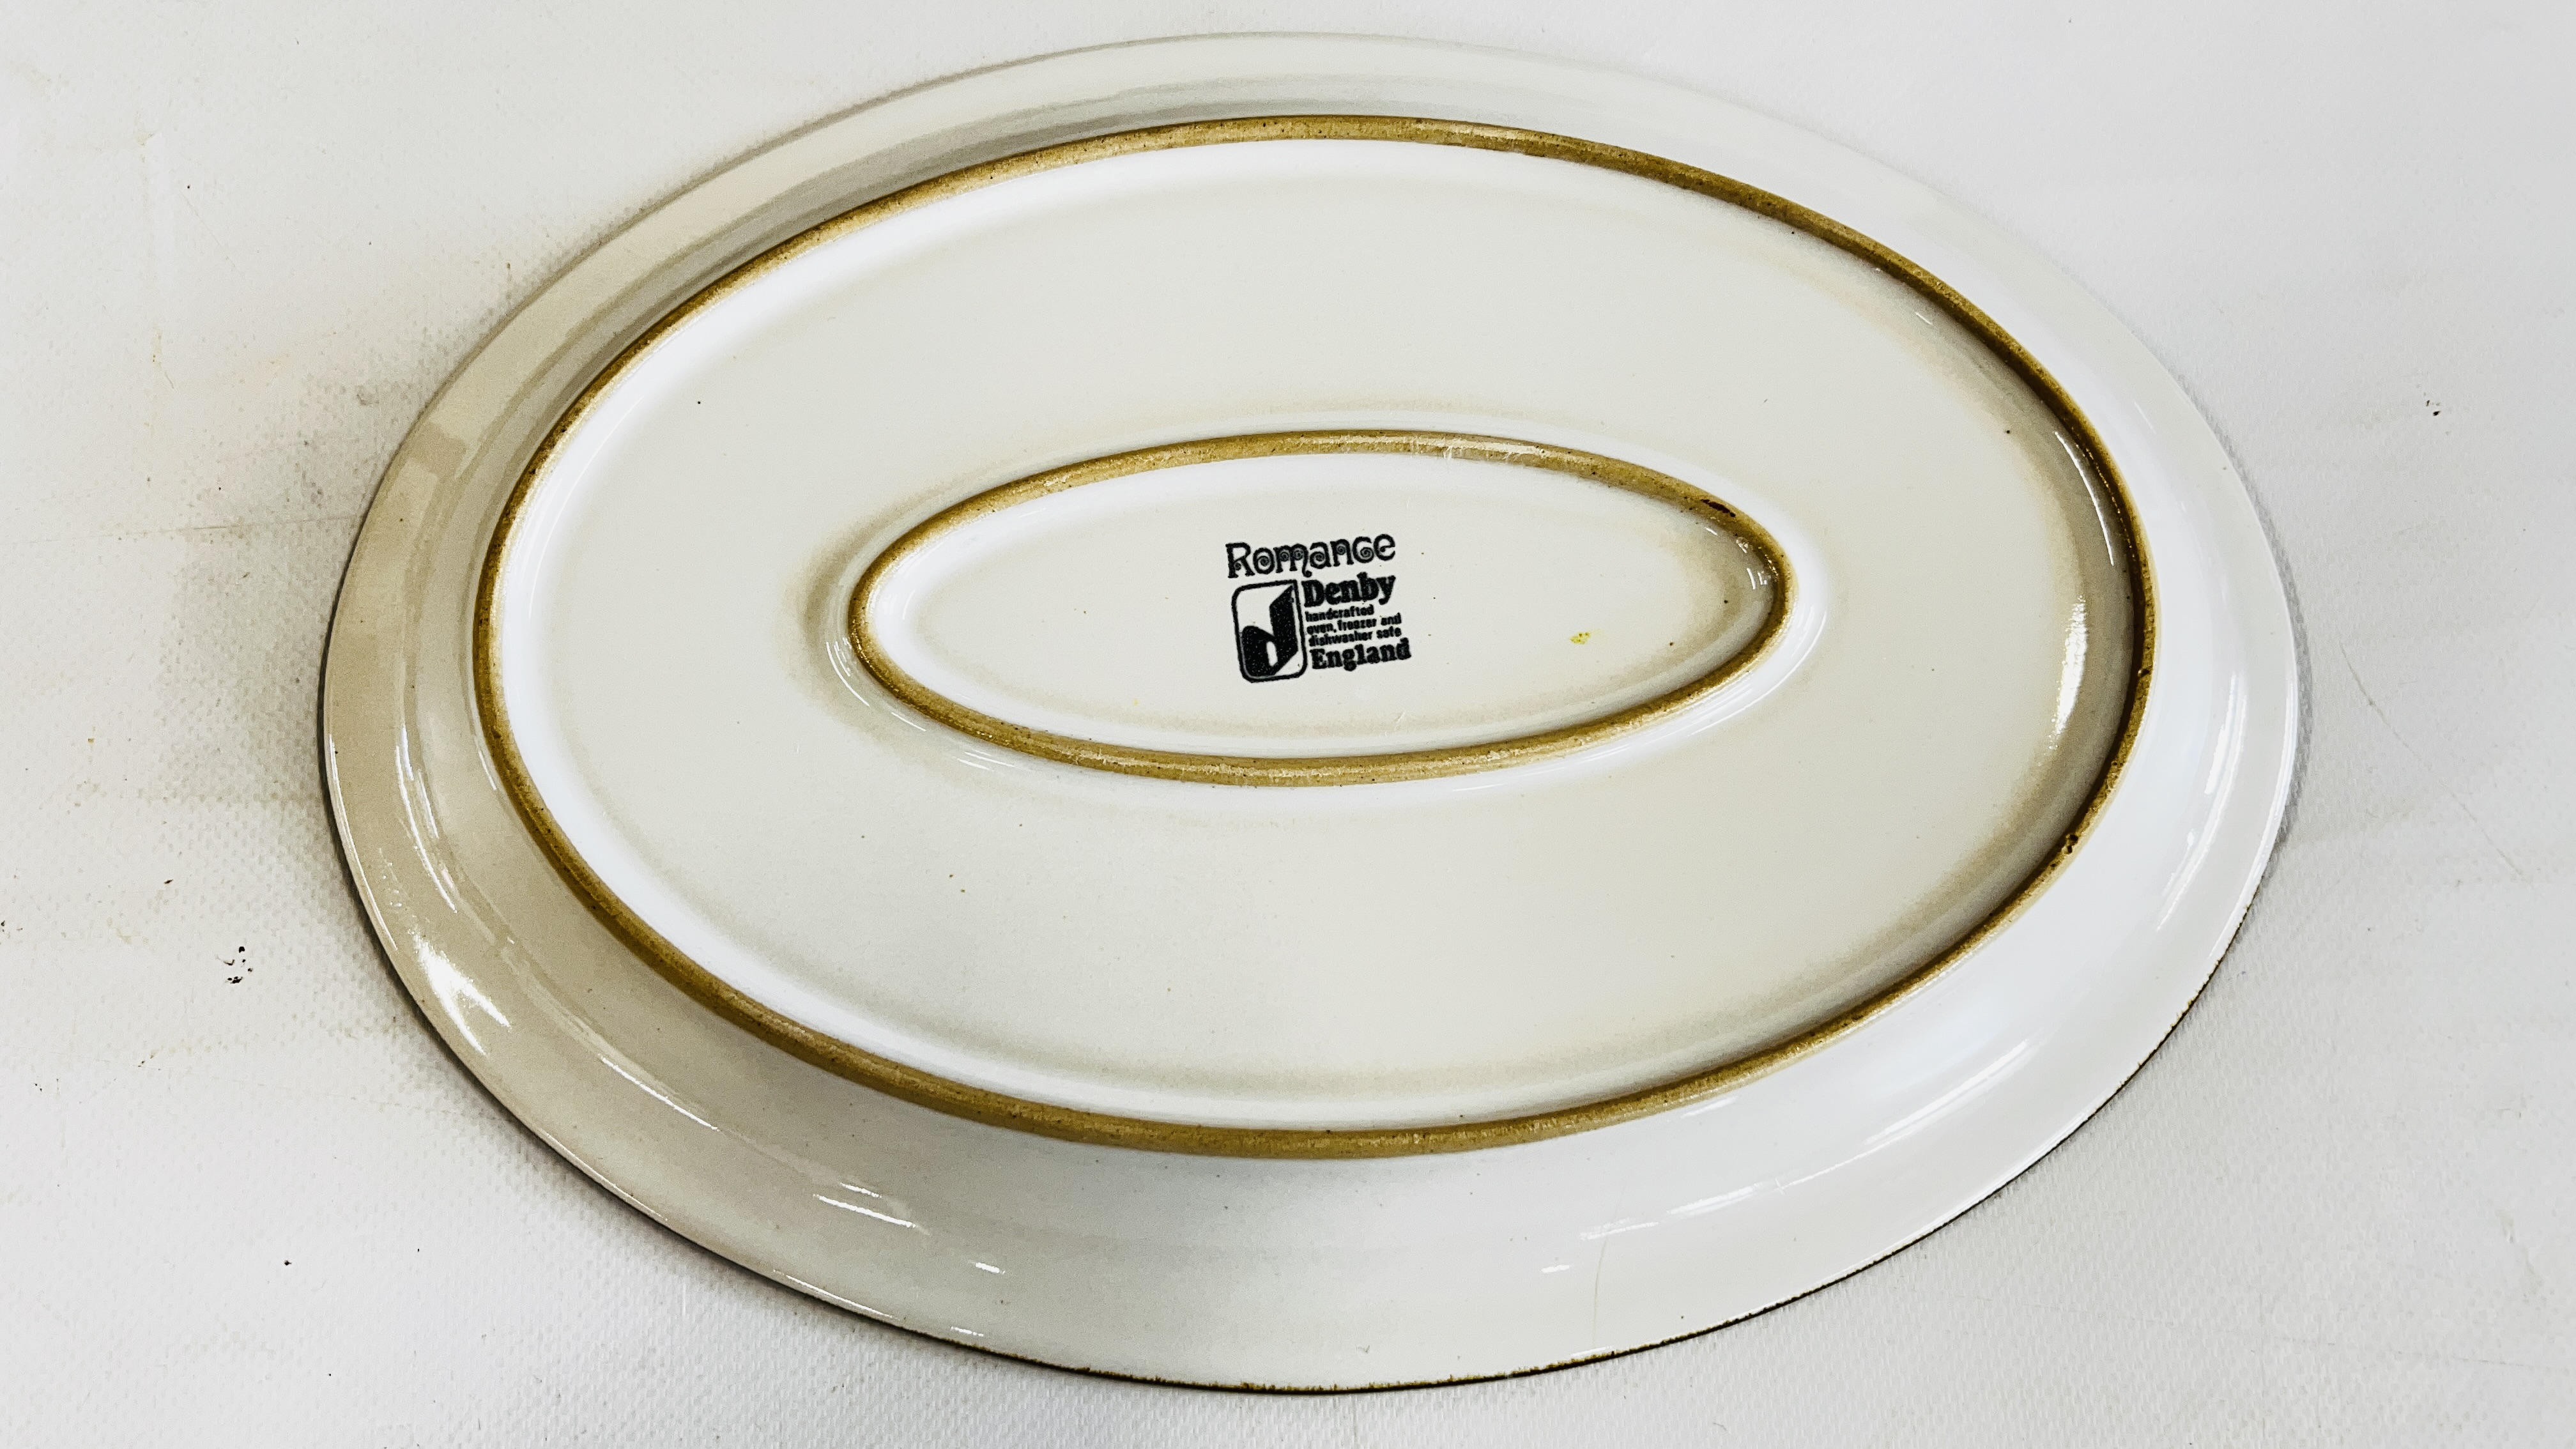 A QUANTITY OF DENBY "ROMANCE" DINNERWARE APPROX 23 PIECES (OVAL PLATE A/F) ALONG WITH A FURTHER 18 - Image 3 of 6